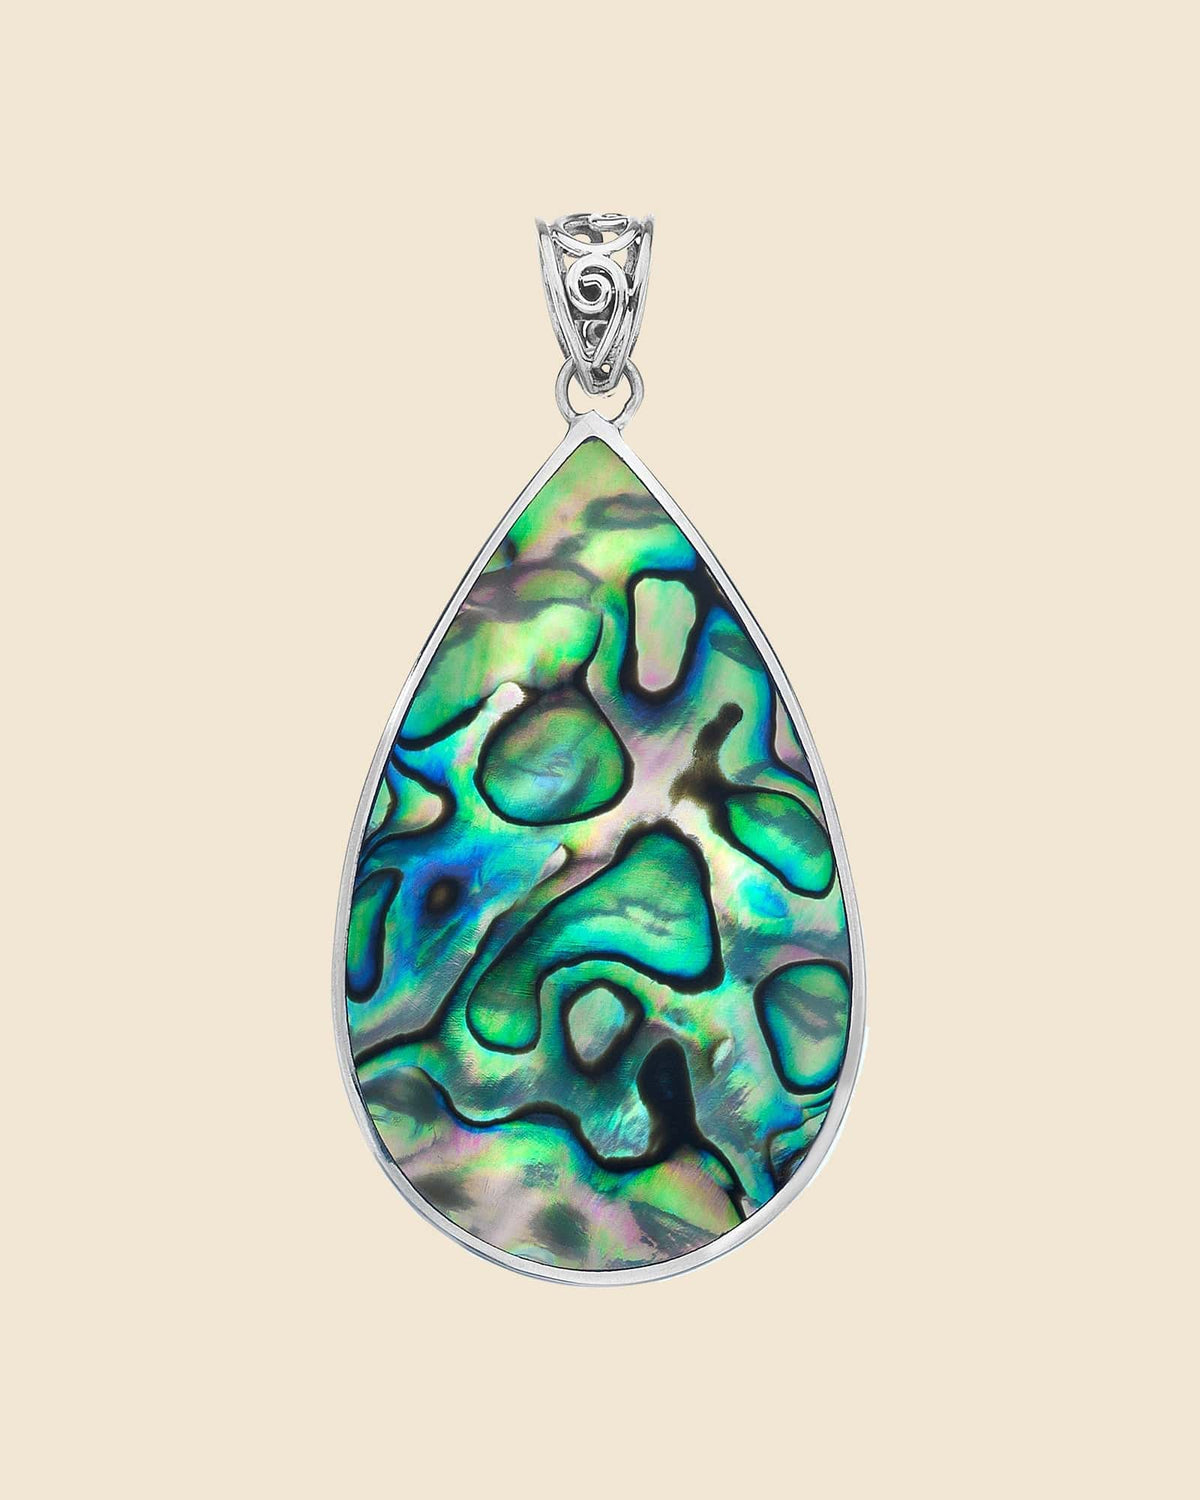 Large Double Sided Sterling Silver and Shell Teardrop Pendant